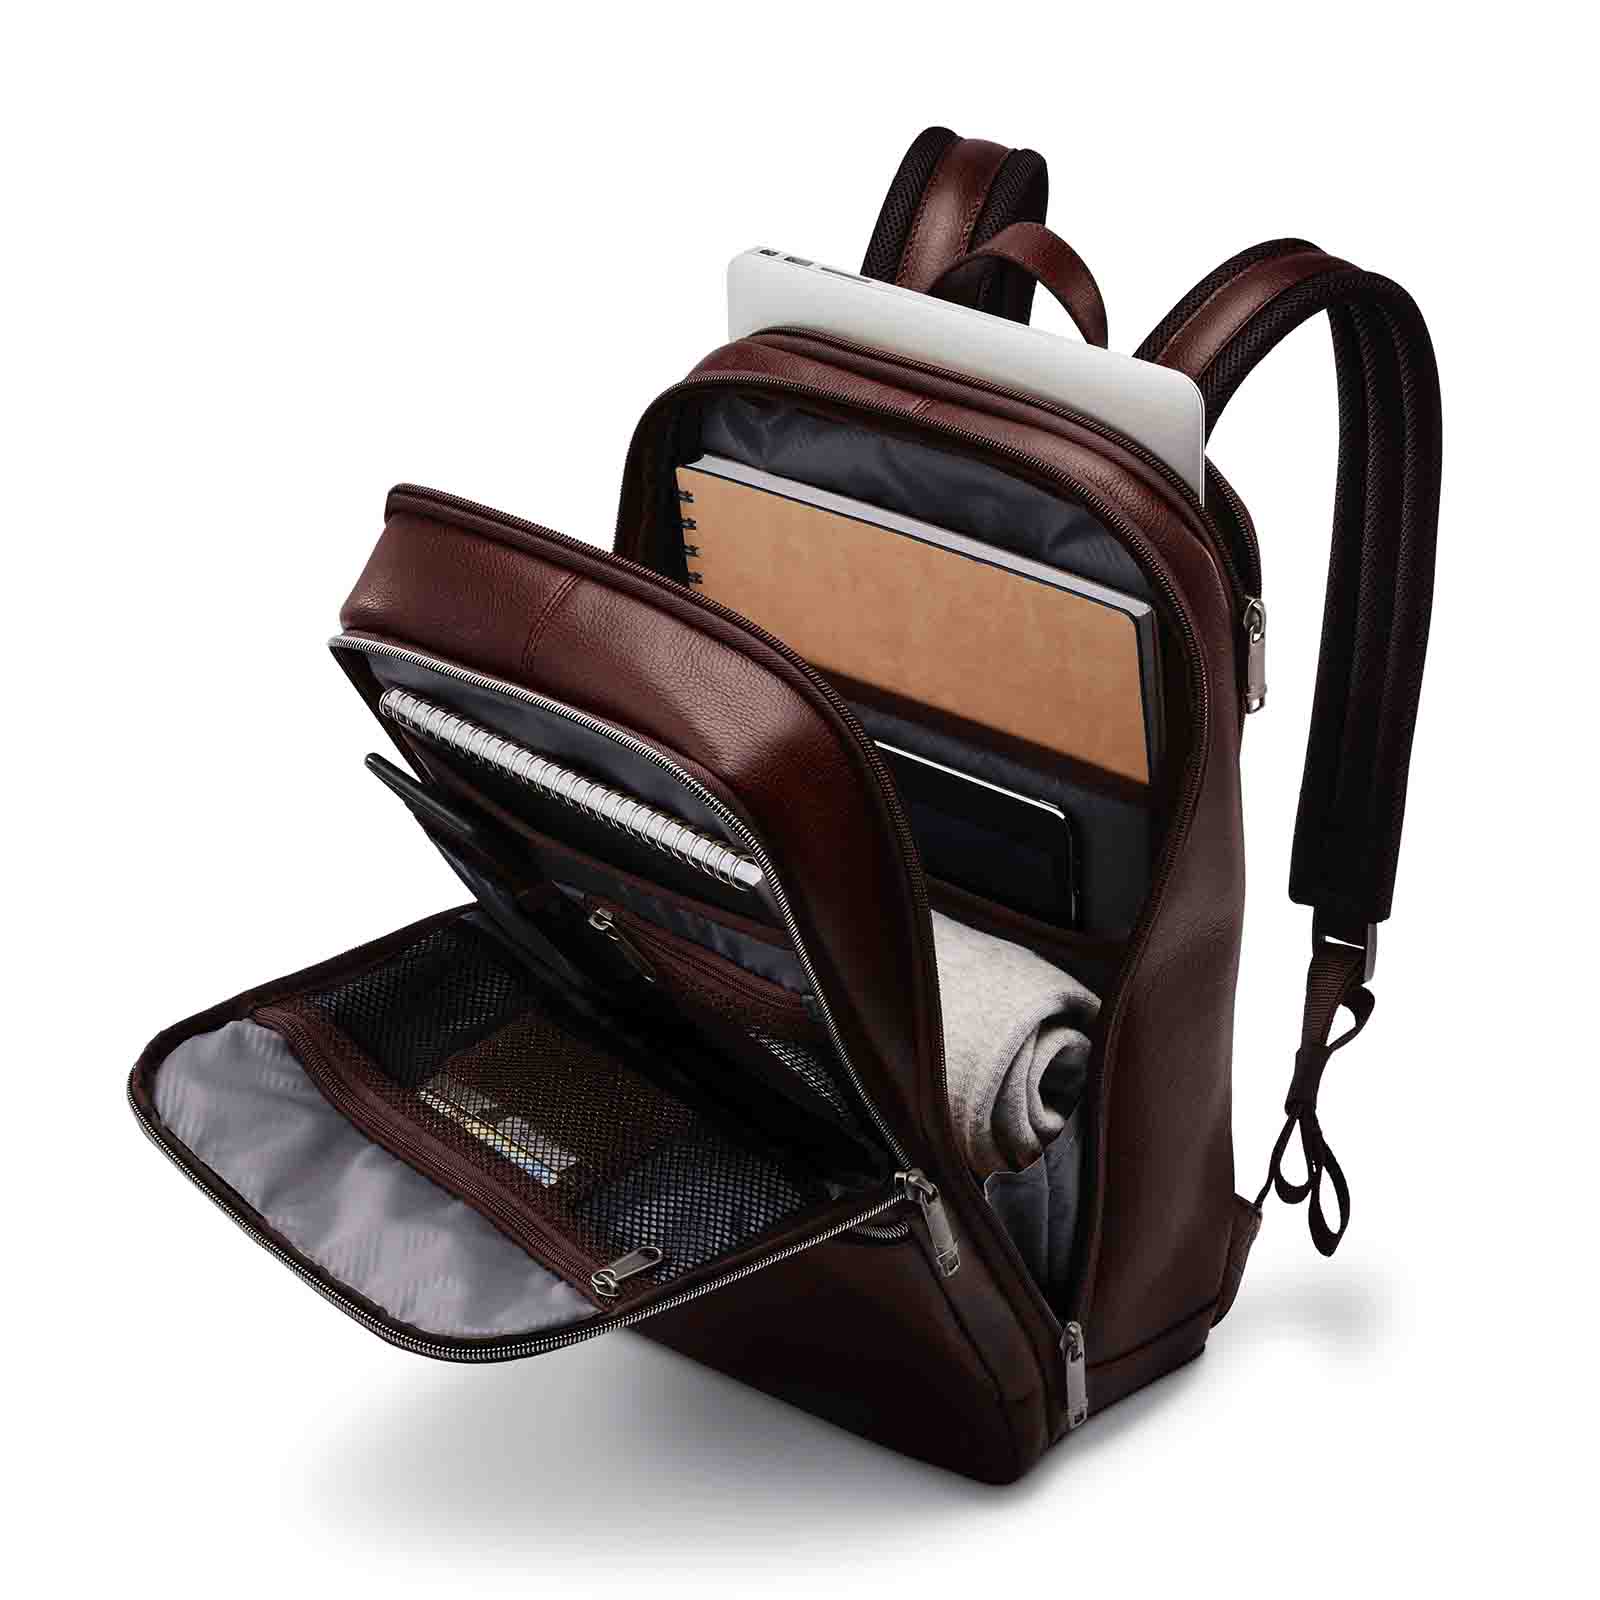 Samsonite-Classic-Leather-14-Inch-Laptop-Backpack-Mahogany-Open